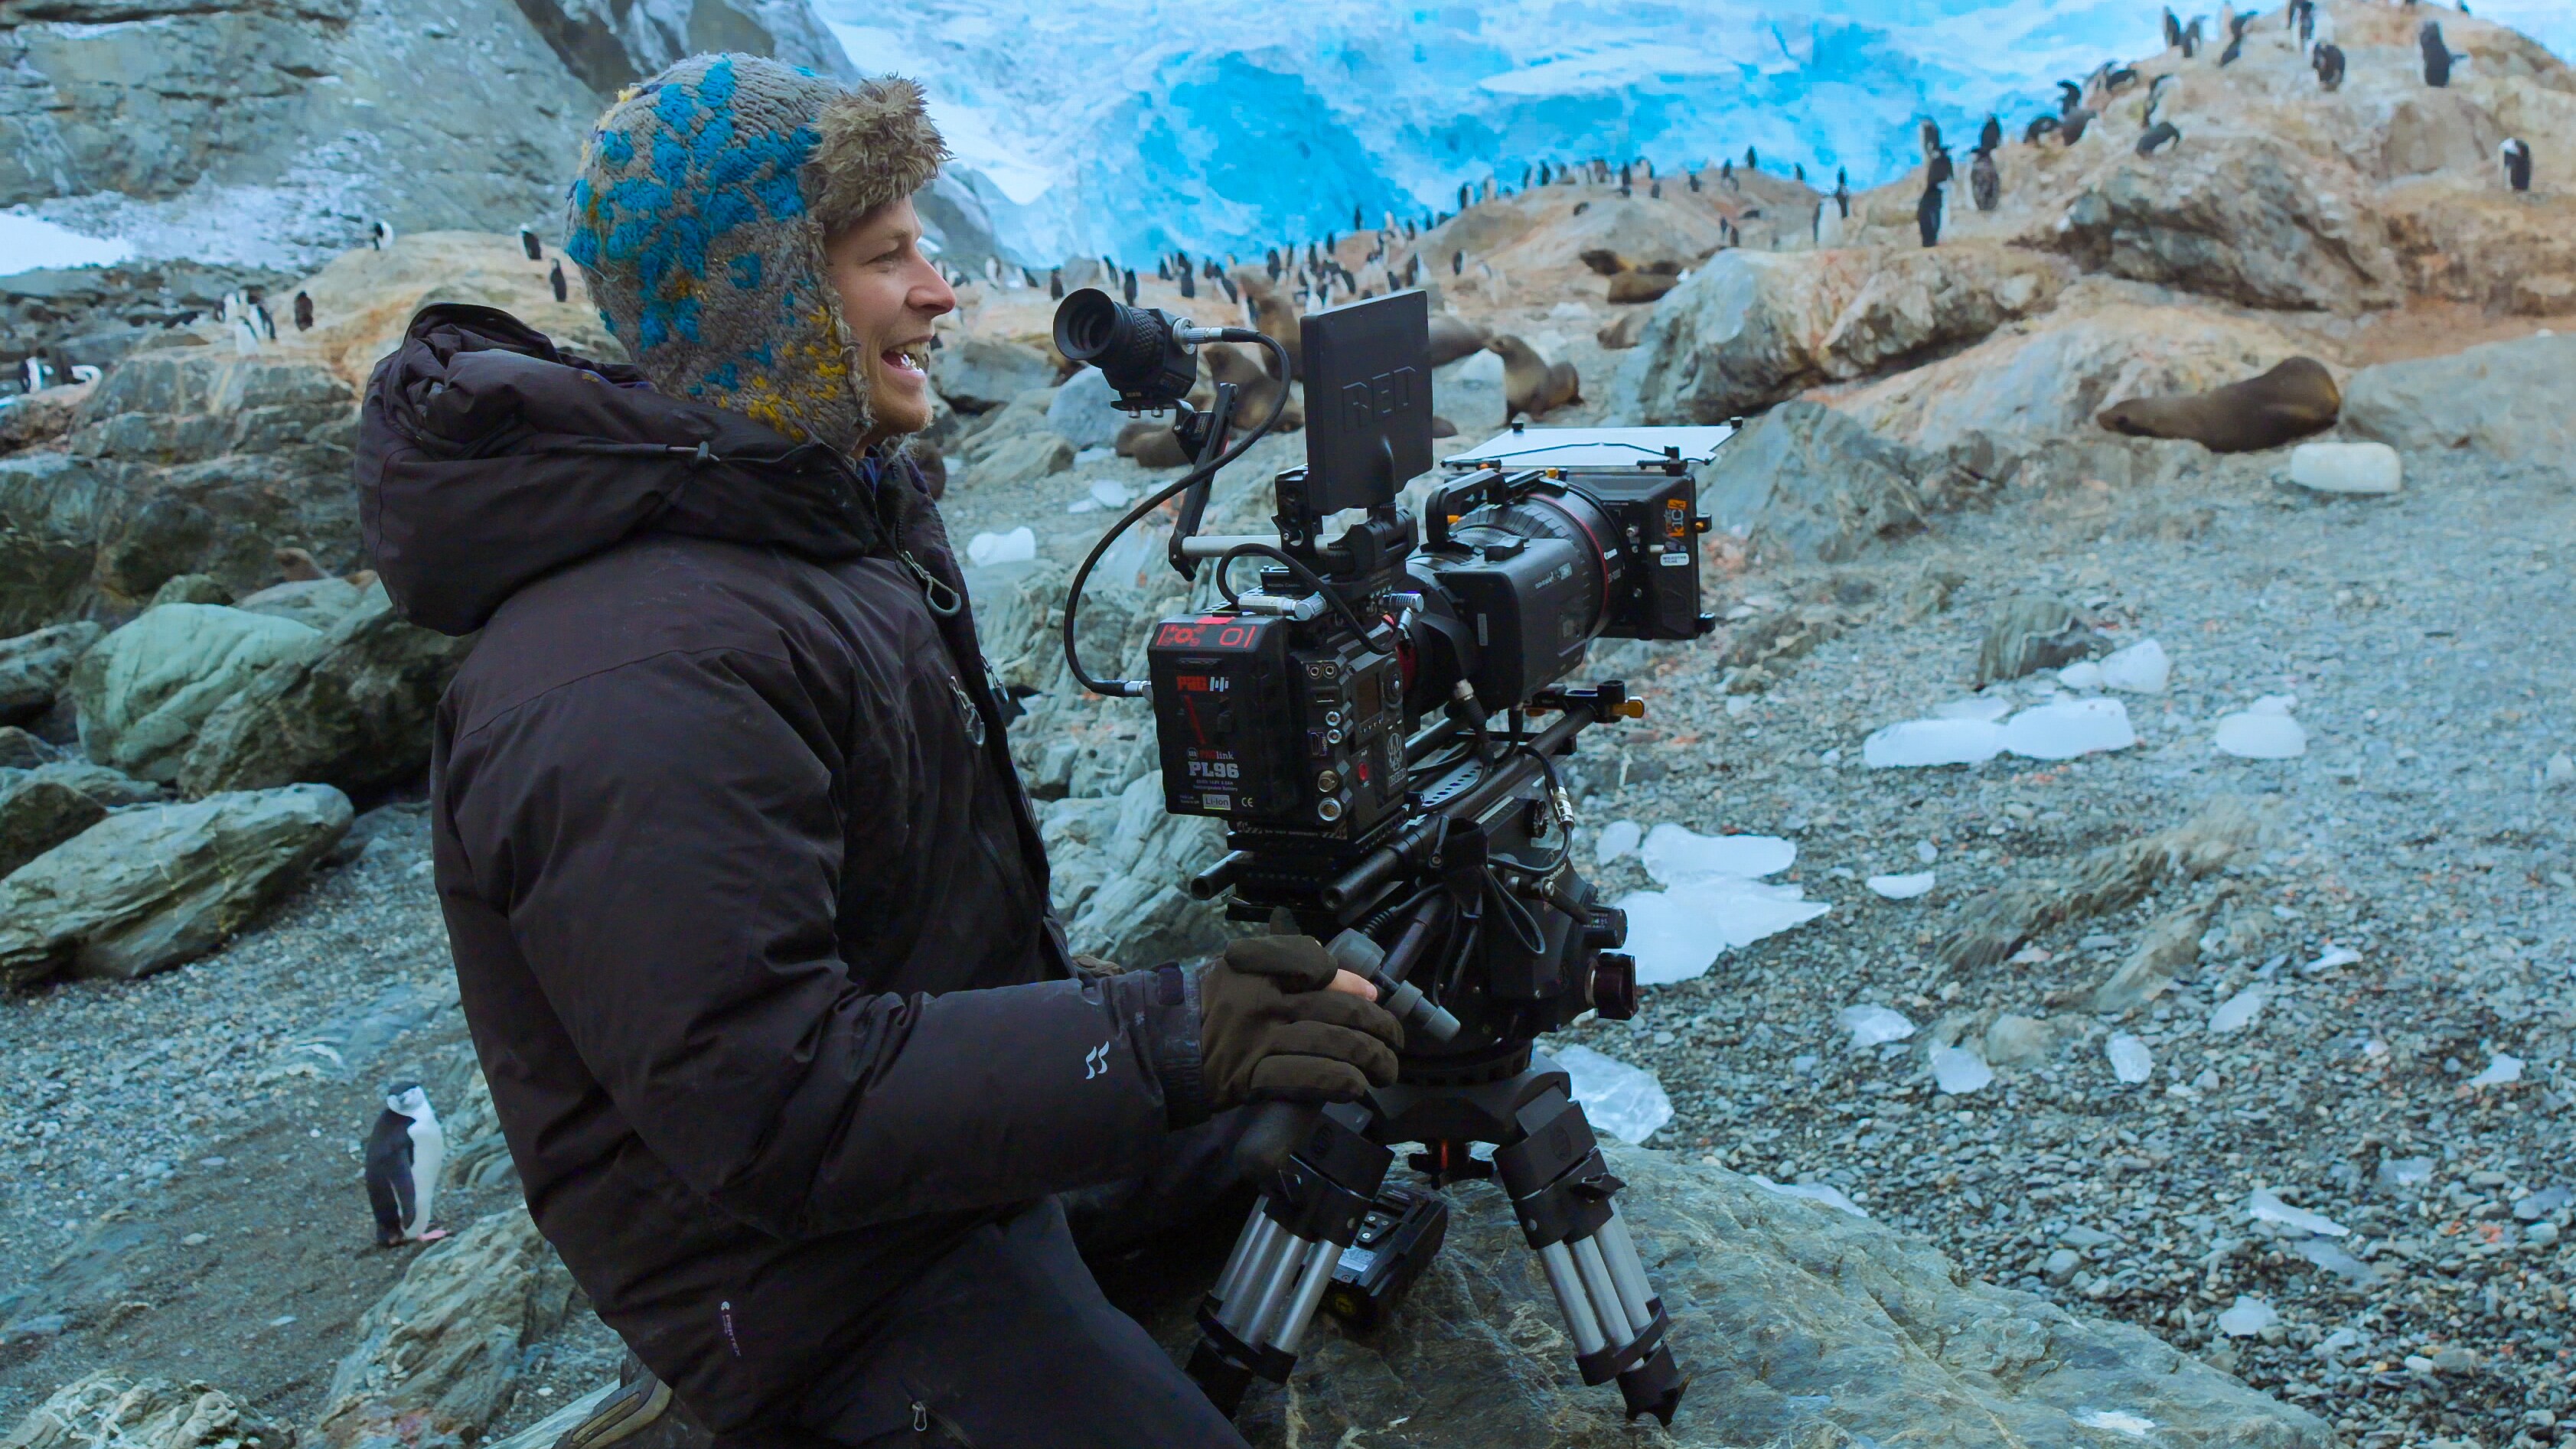 Elephant Island, Antarctica - Bertie Gregory films chinstrap penguins in a colony at Point Wild, Elephant Island, Antarctica. (Credit: National Geographic/Will West for Disney+)